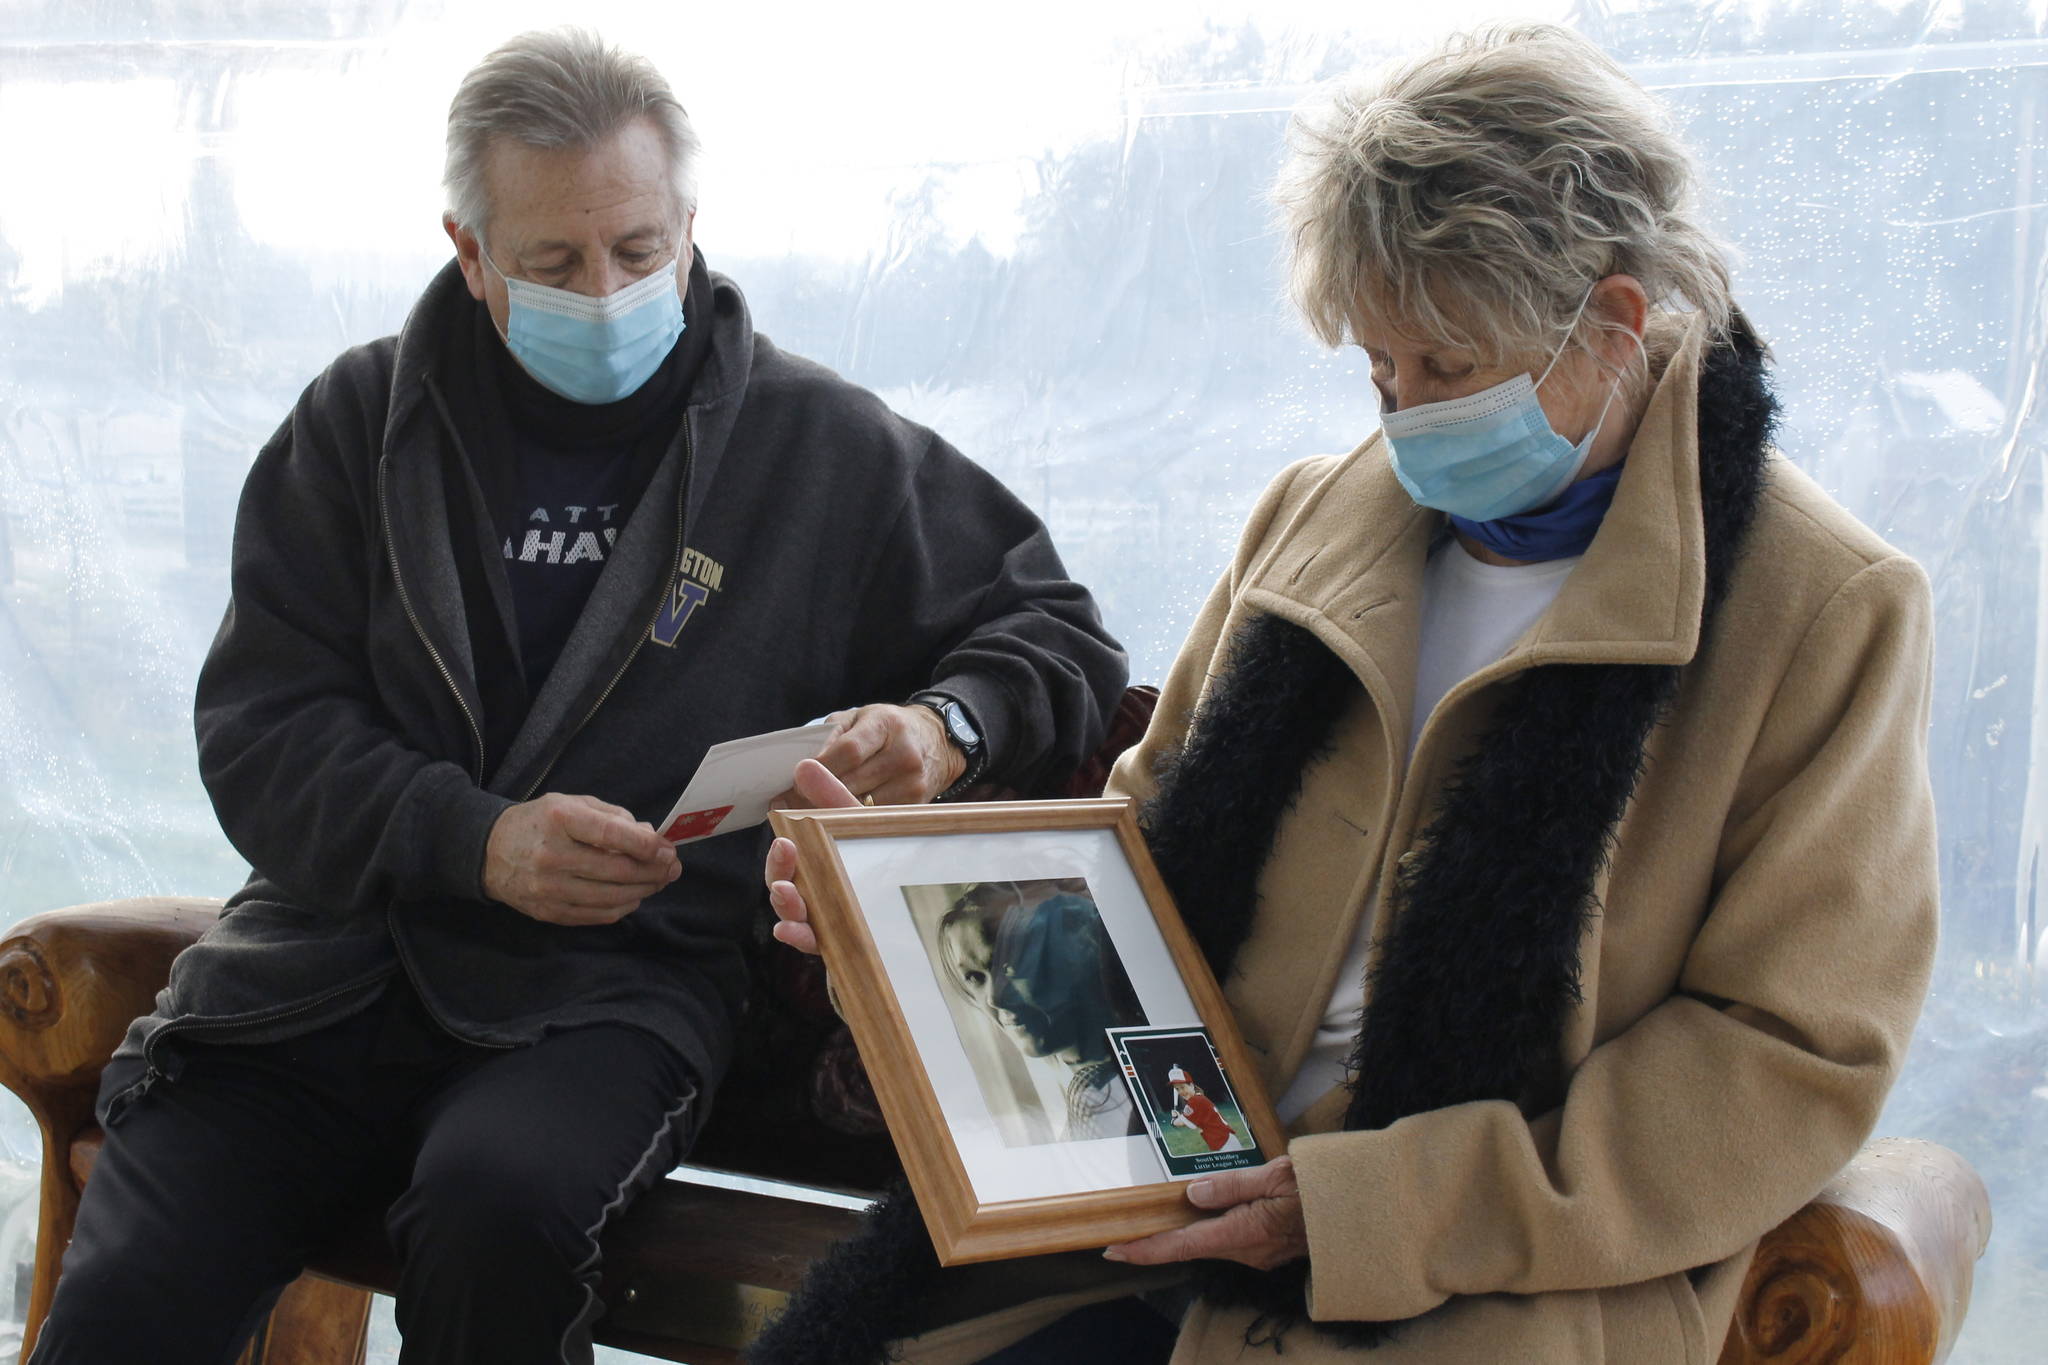 Paulette and Greg Beck reflect on photos of their daughter, Piper Travis, who died in 2017. Photo by Kira Erickson/South Whidbey Record